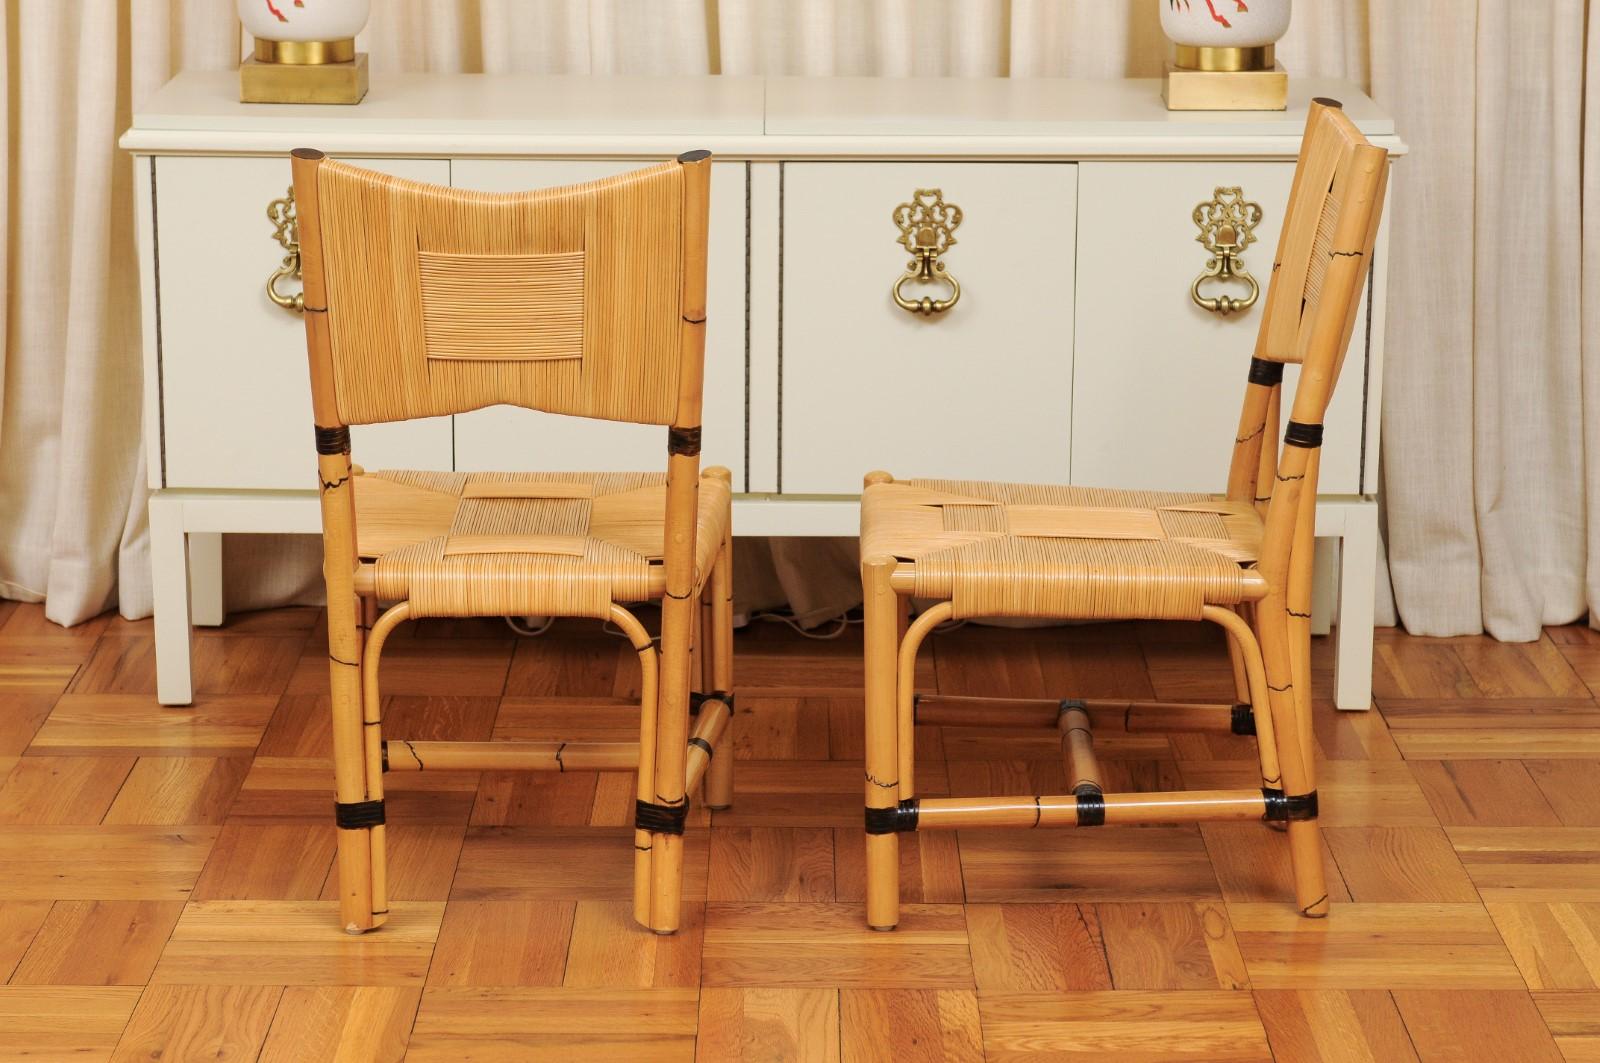 Superb Set of 8 Rush Rattan Dining Chairs by John Hutton for Donghia, circa 1995 For Sale 4